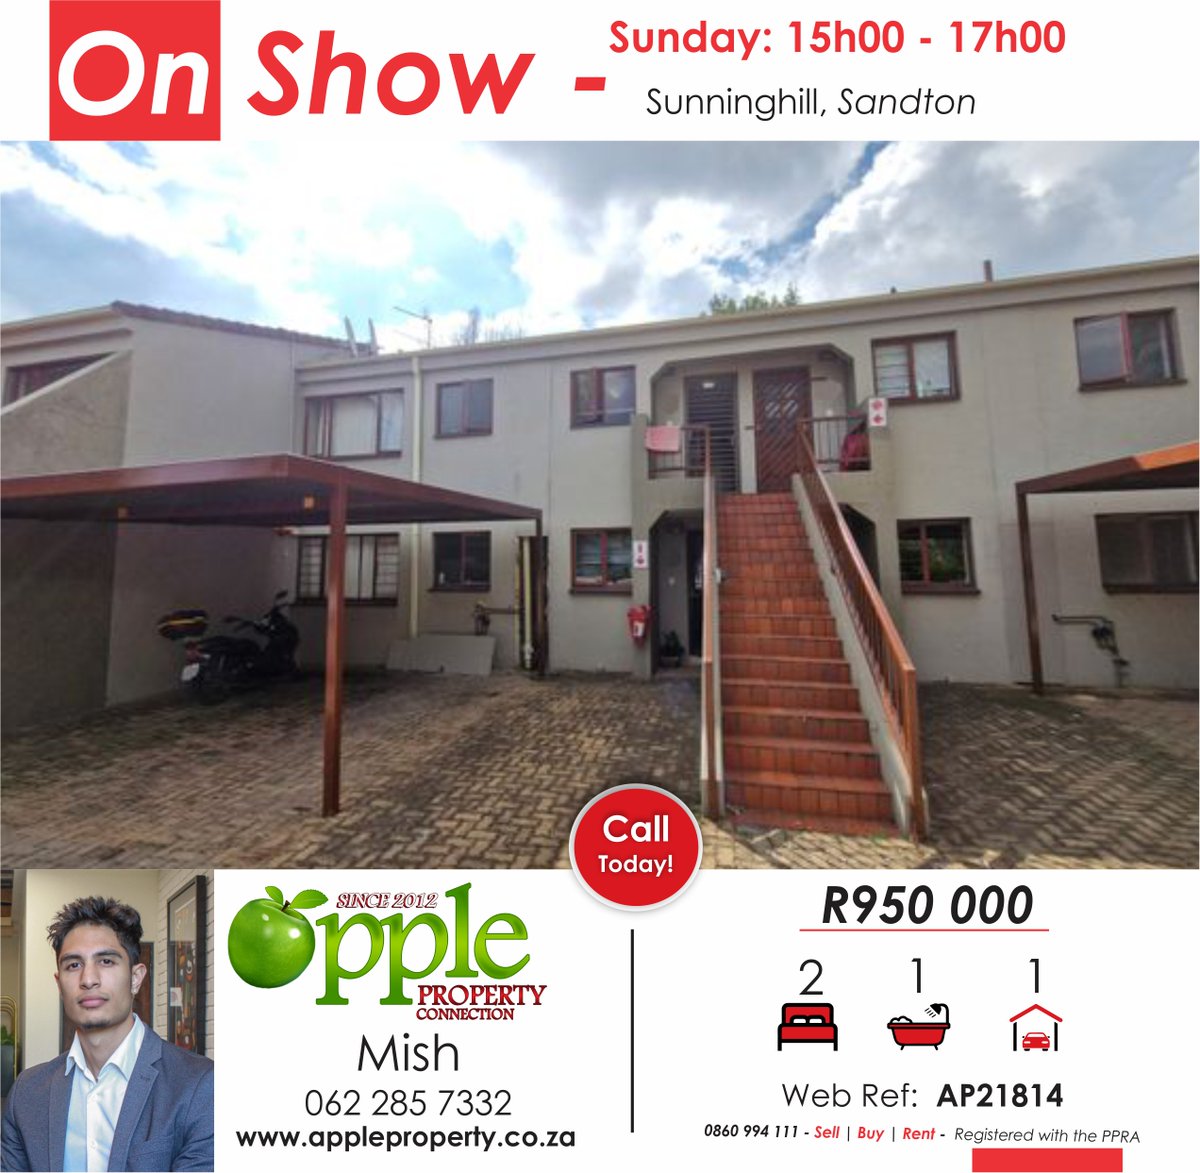 😎CHECK IT OUT!
🎉ONSHOW
#forsale
#sunninghill #sandton
#nationwide #ApplePropertyConnection
0860 994 111 | appleproperty.co.za